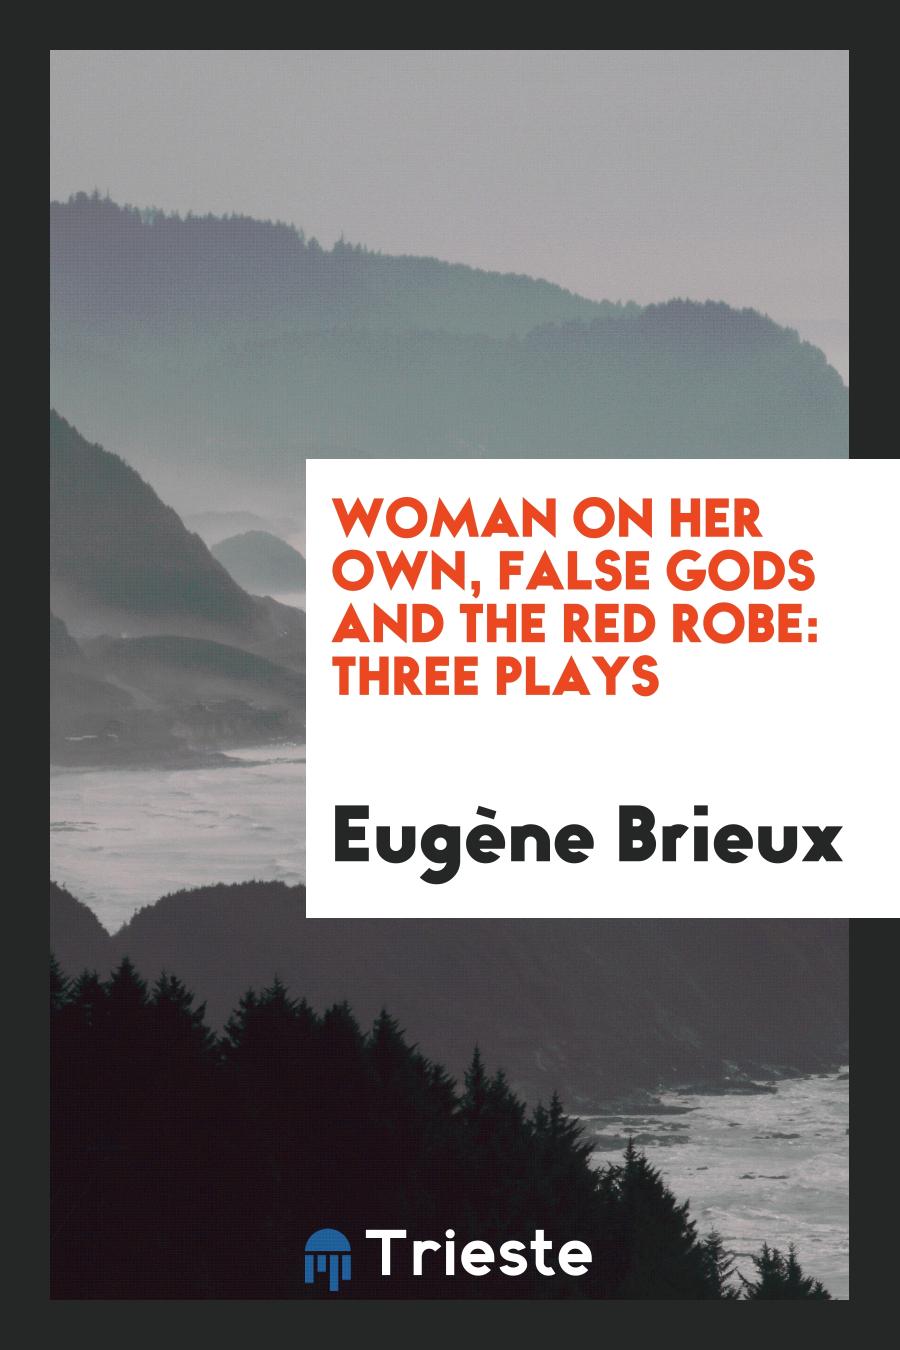 Woman on Her Own, False Gods and The Red Robe: Three Plays